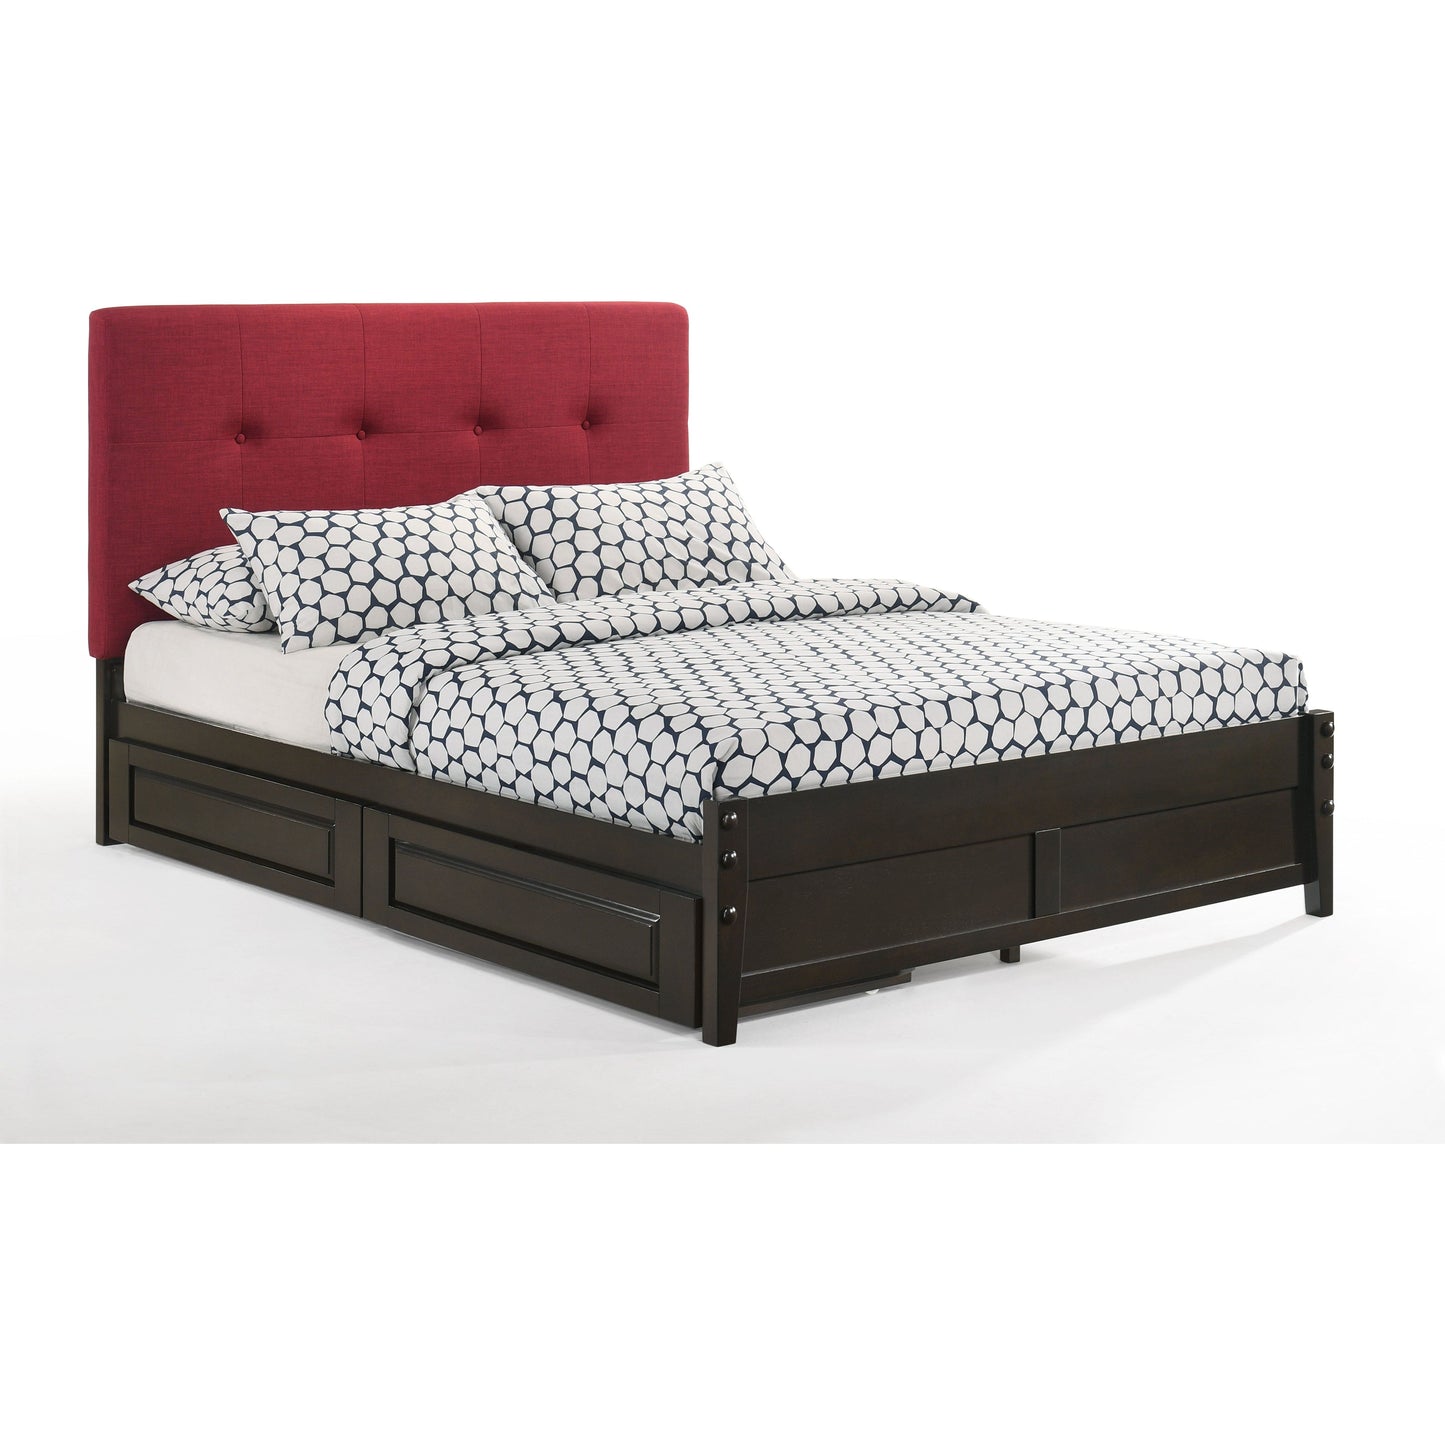 The Bedroom Emporium Paprika Twin Bed in Charcoal with Chocolate Finish Frame (K Series)